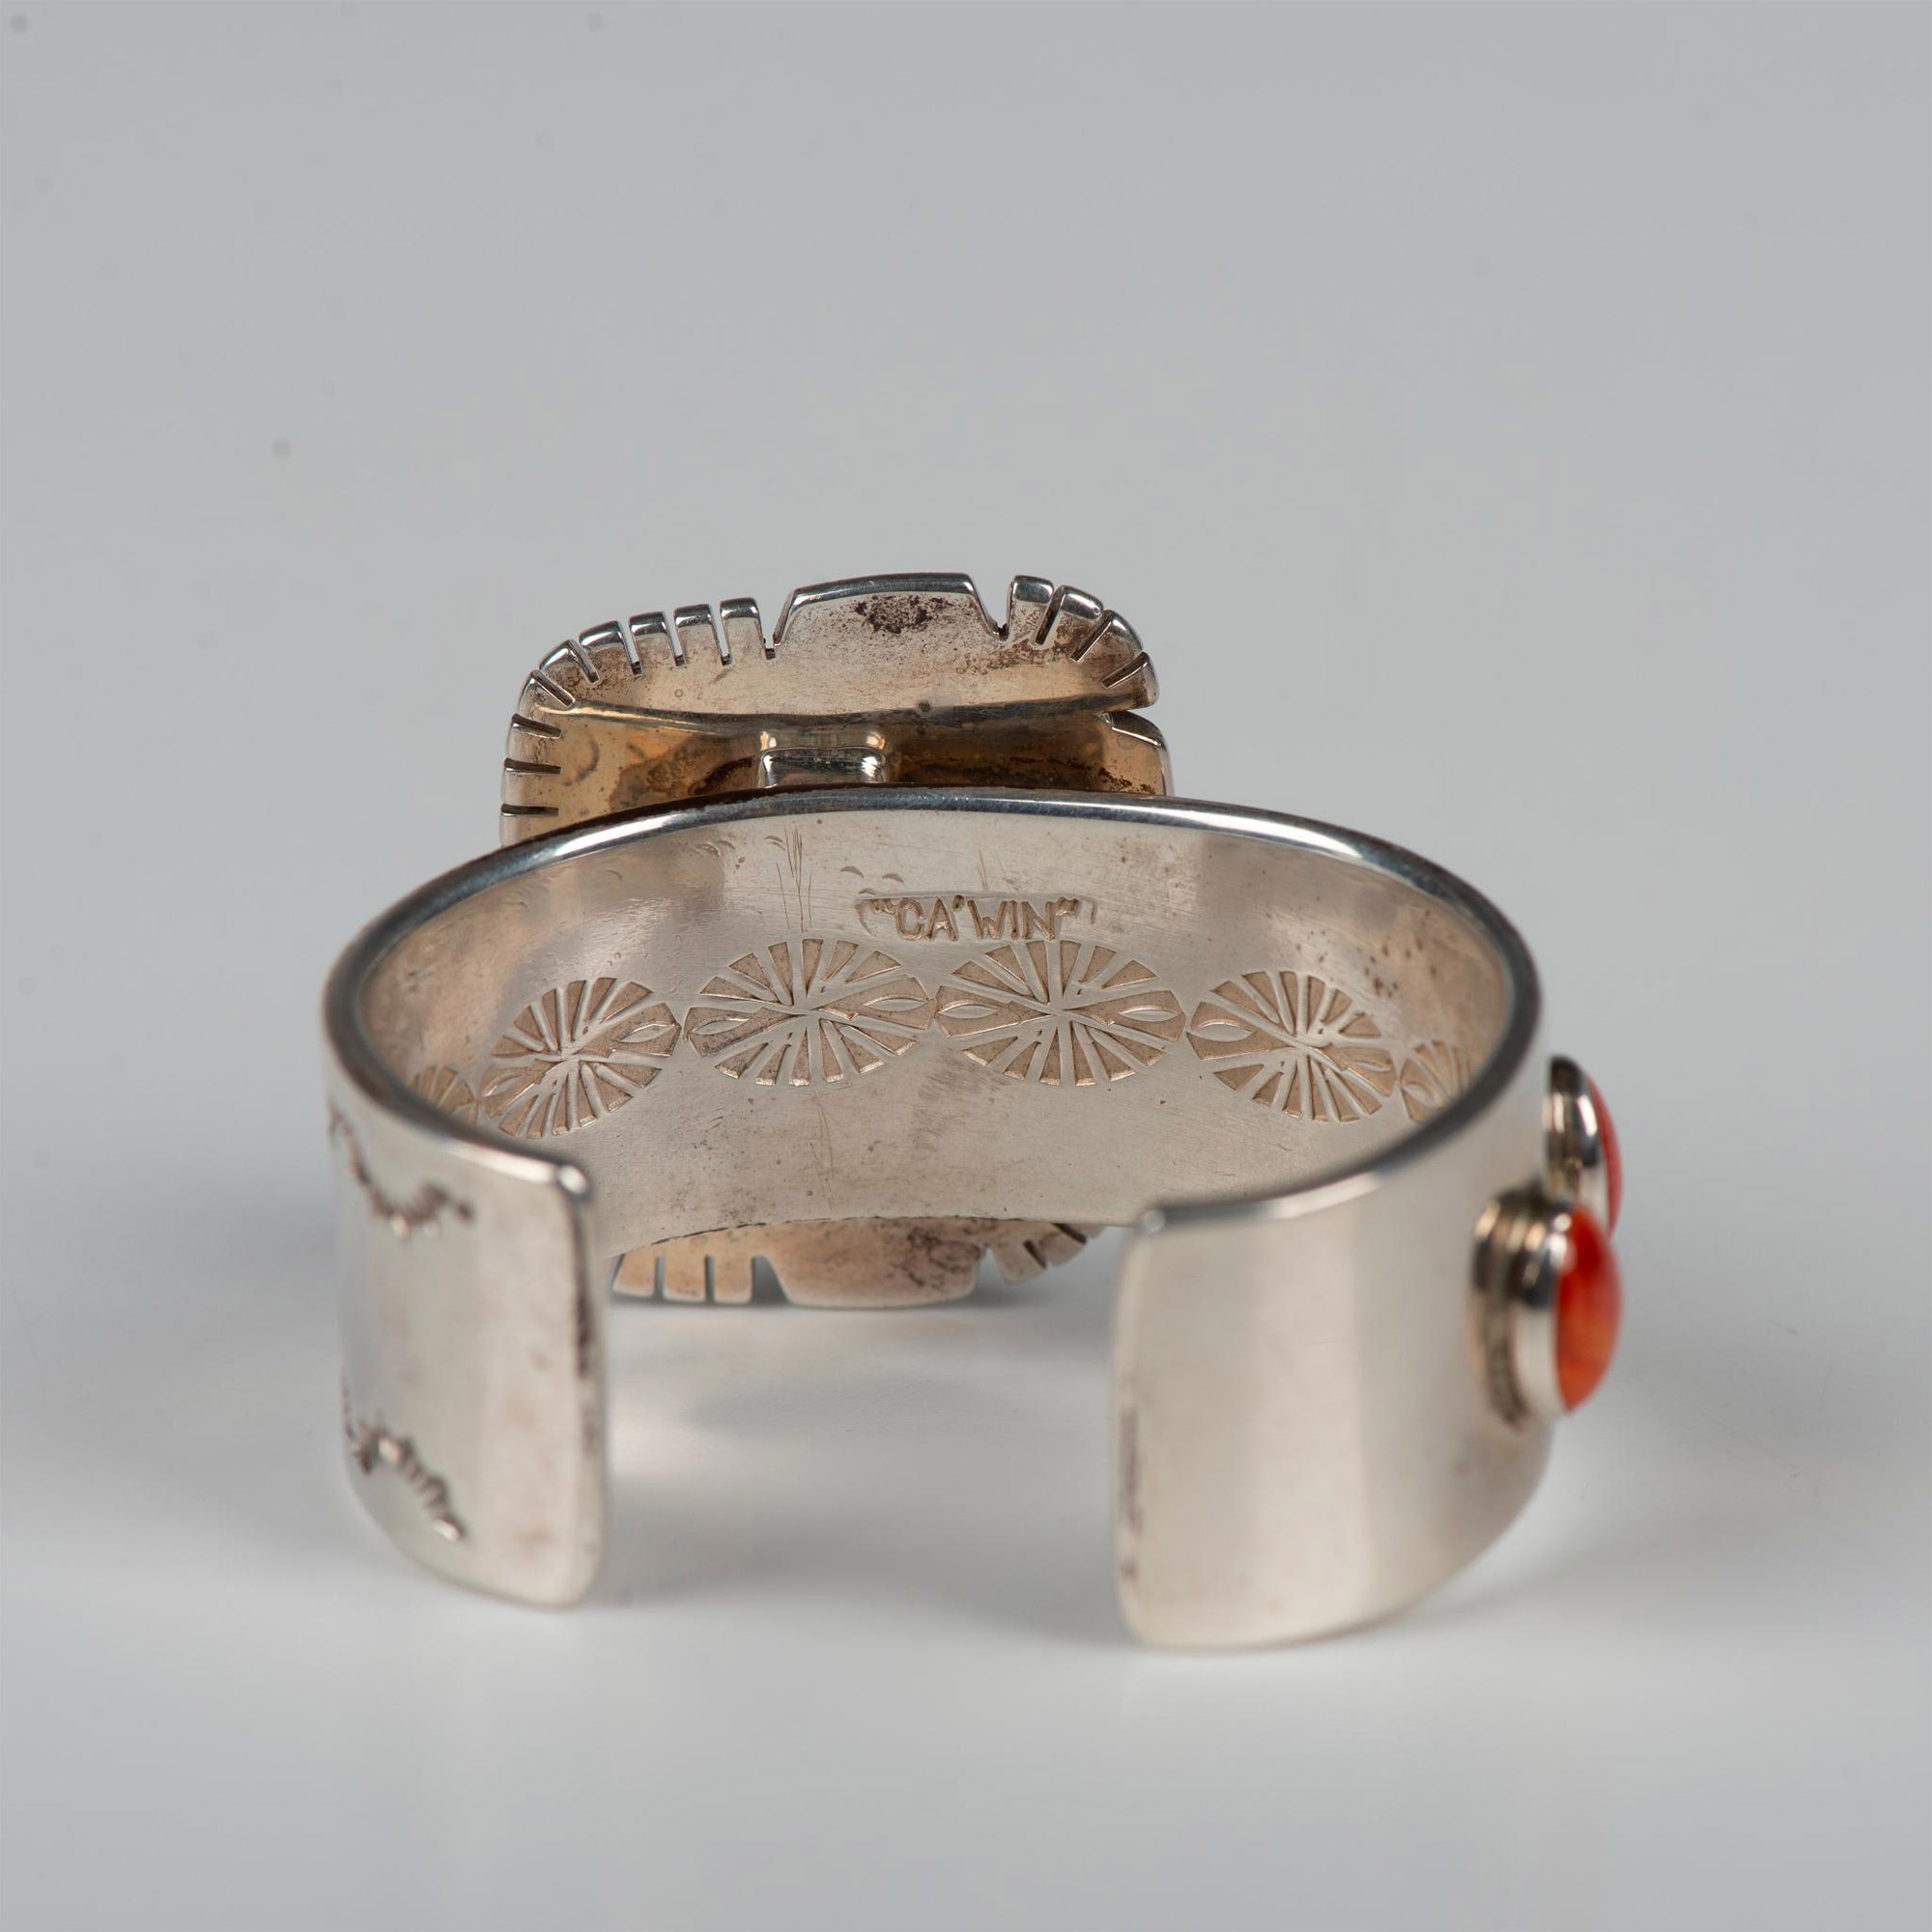 Ca'Win Pueblo Sterling Silver Red Spiny Oyster Cuff Bracelet - Image 4 of 7